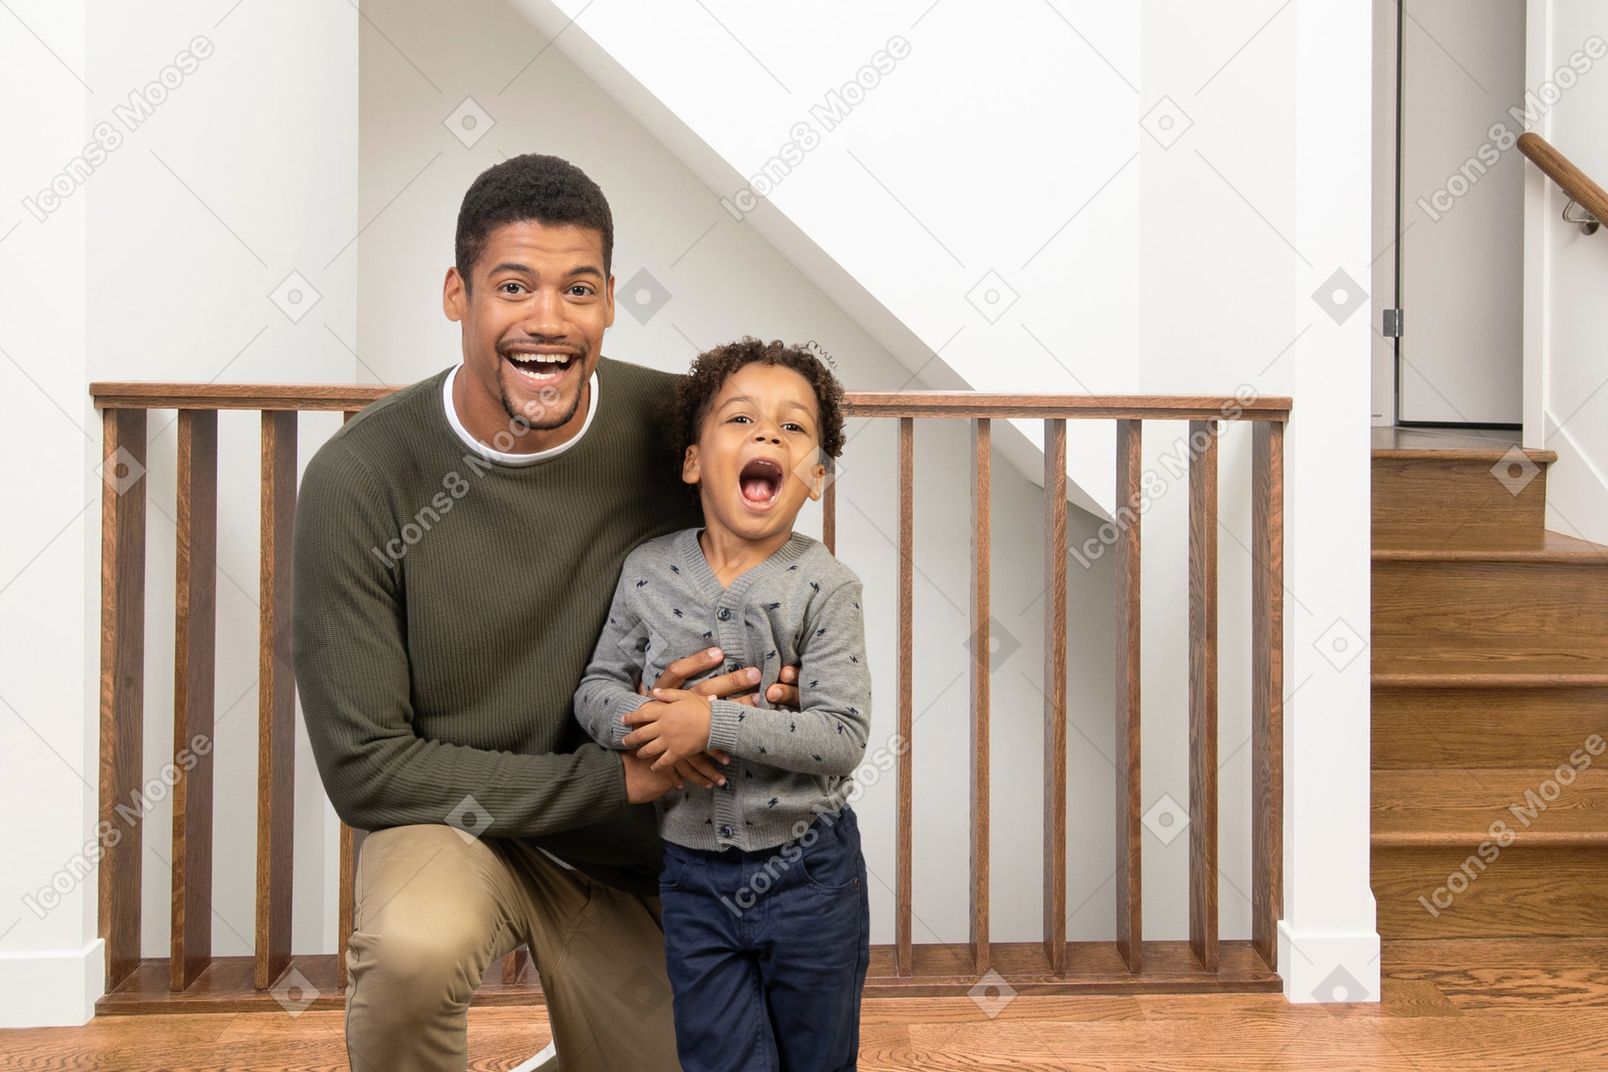 Man and boy laughing at home